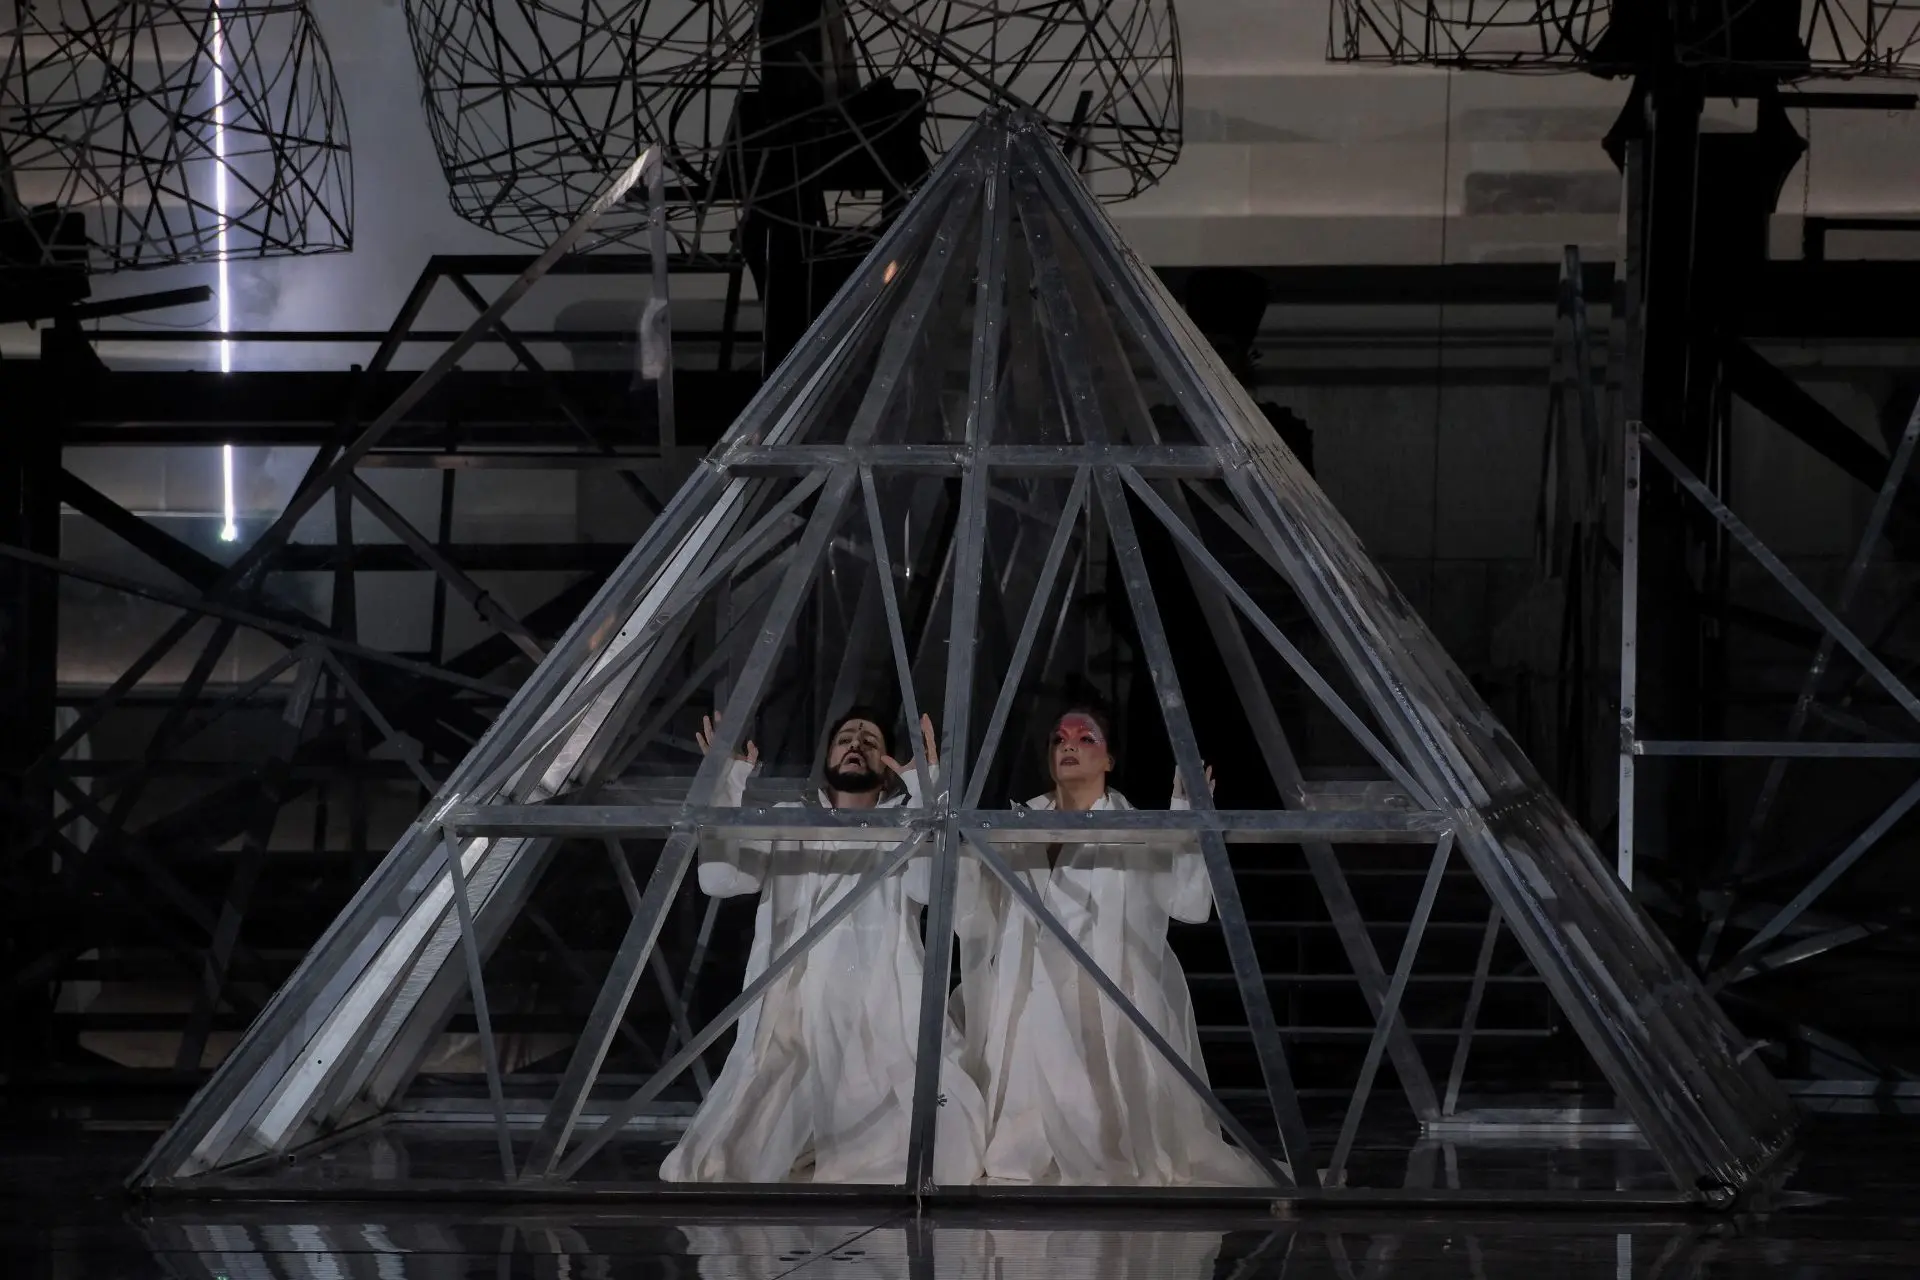 Radamès and Aida are on their knees side by side within an iron structure in the form of a pyramid that recalls the one outside the Louvre. Both are dressed in white and hold their hands up in front of them. Aida is wearing light red and purple makeup on her forehead covered with multicolored glitter, while Radamès, has a small black line at the center of his.